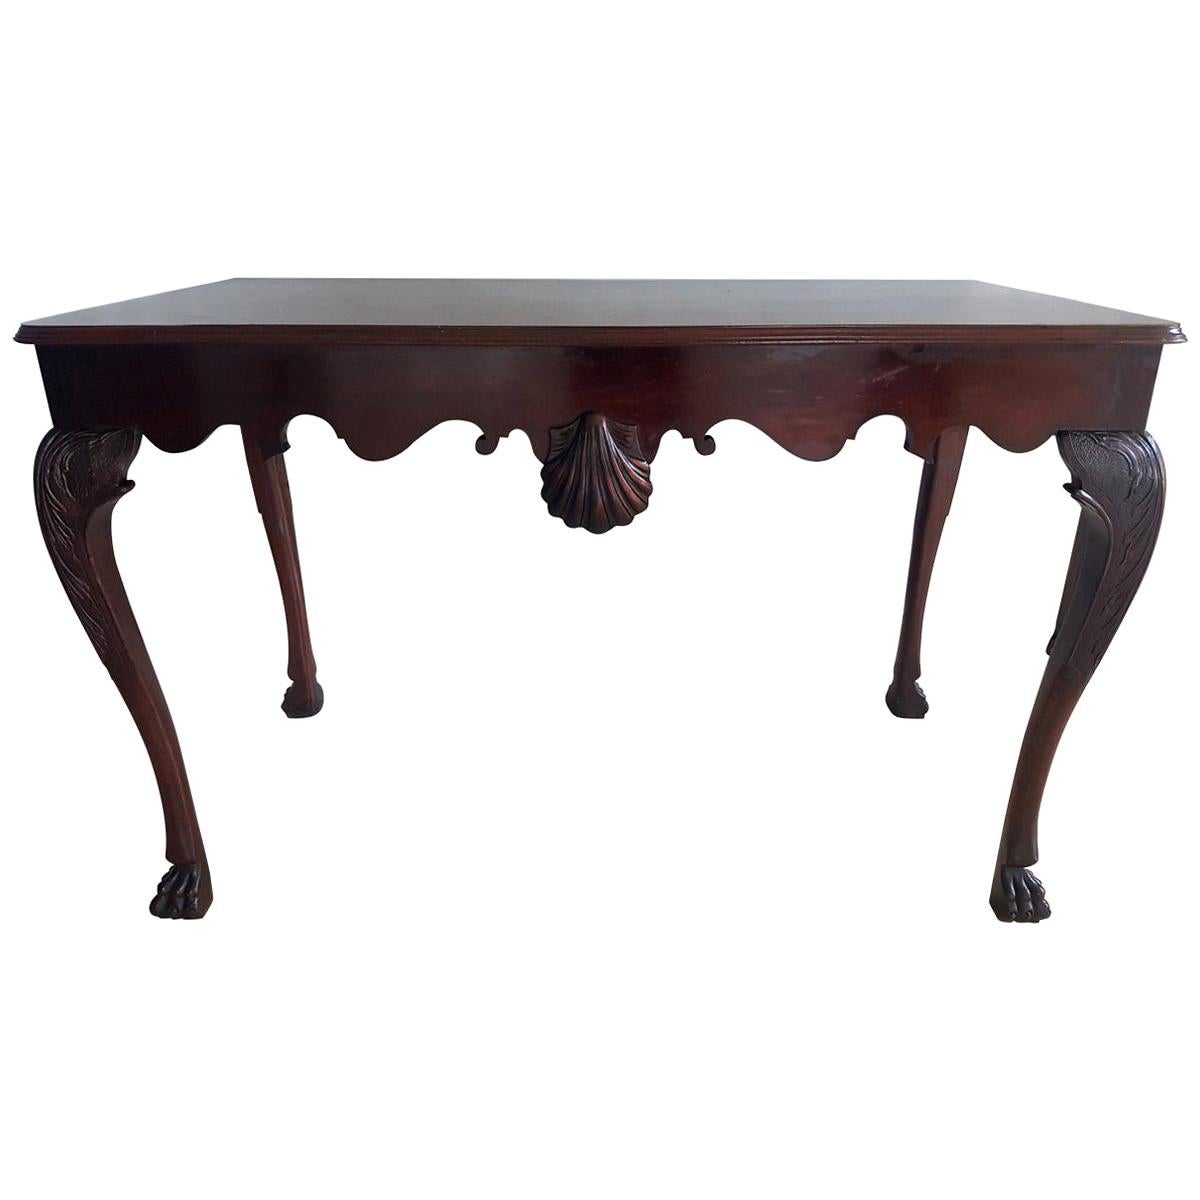 Irish 19th Century Finely Carved Mahogany Side Table Attributed to James Hicks For Sale